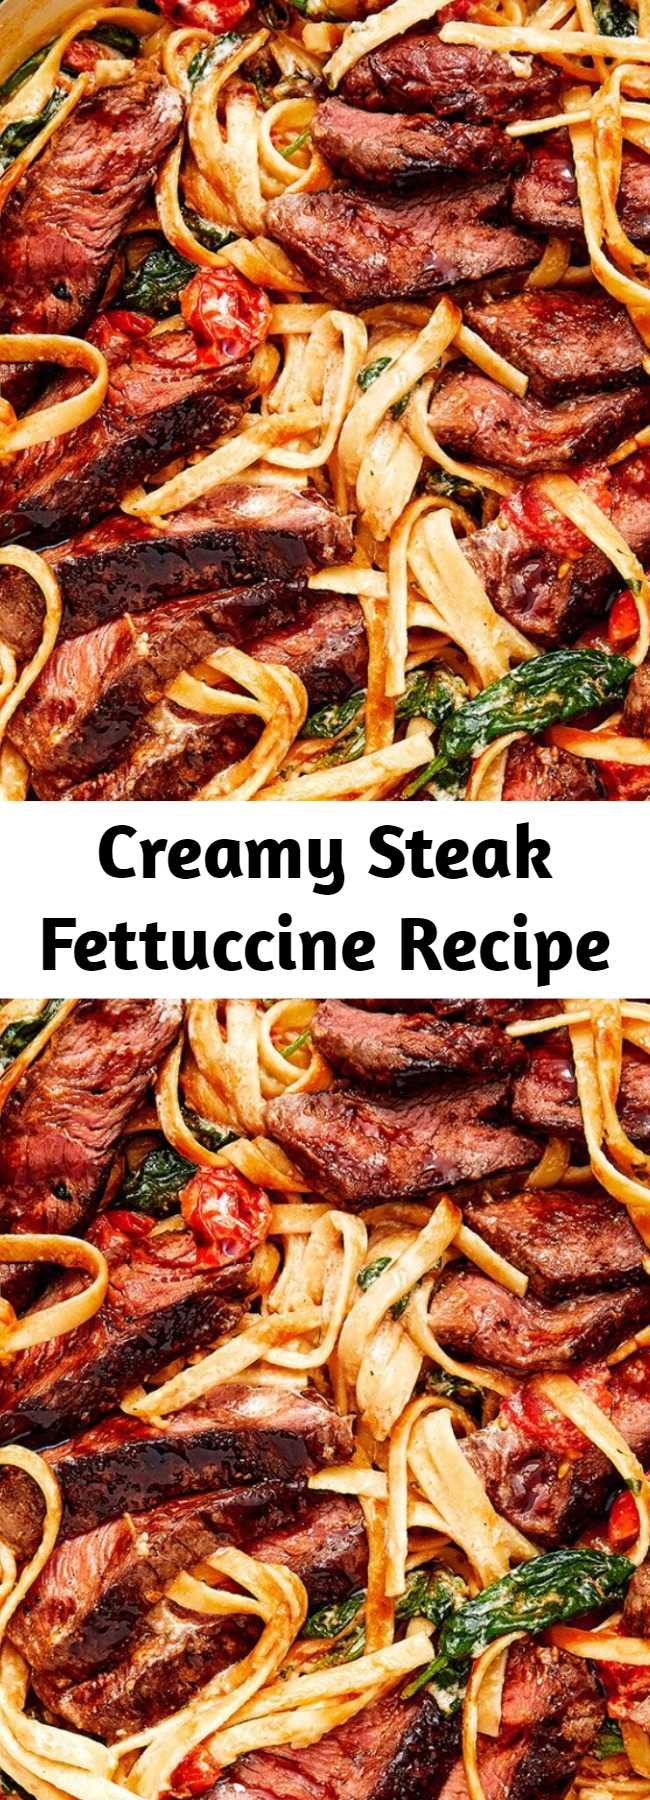 Creamy Steak Fettuccine Recipe - Whenever we crave steak this dish is always what we want to make. It comes together quickly and is so full of flavor. It makes us forget chicken ever existed. Made this for date night and fell in love over the dish? Let us know in the comments below and don't forget to rate it! #food #easyrecipe #pasta #steak #dinner